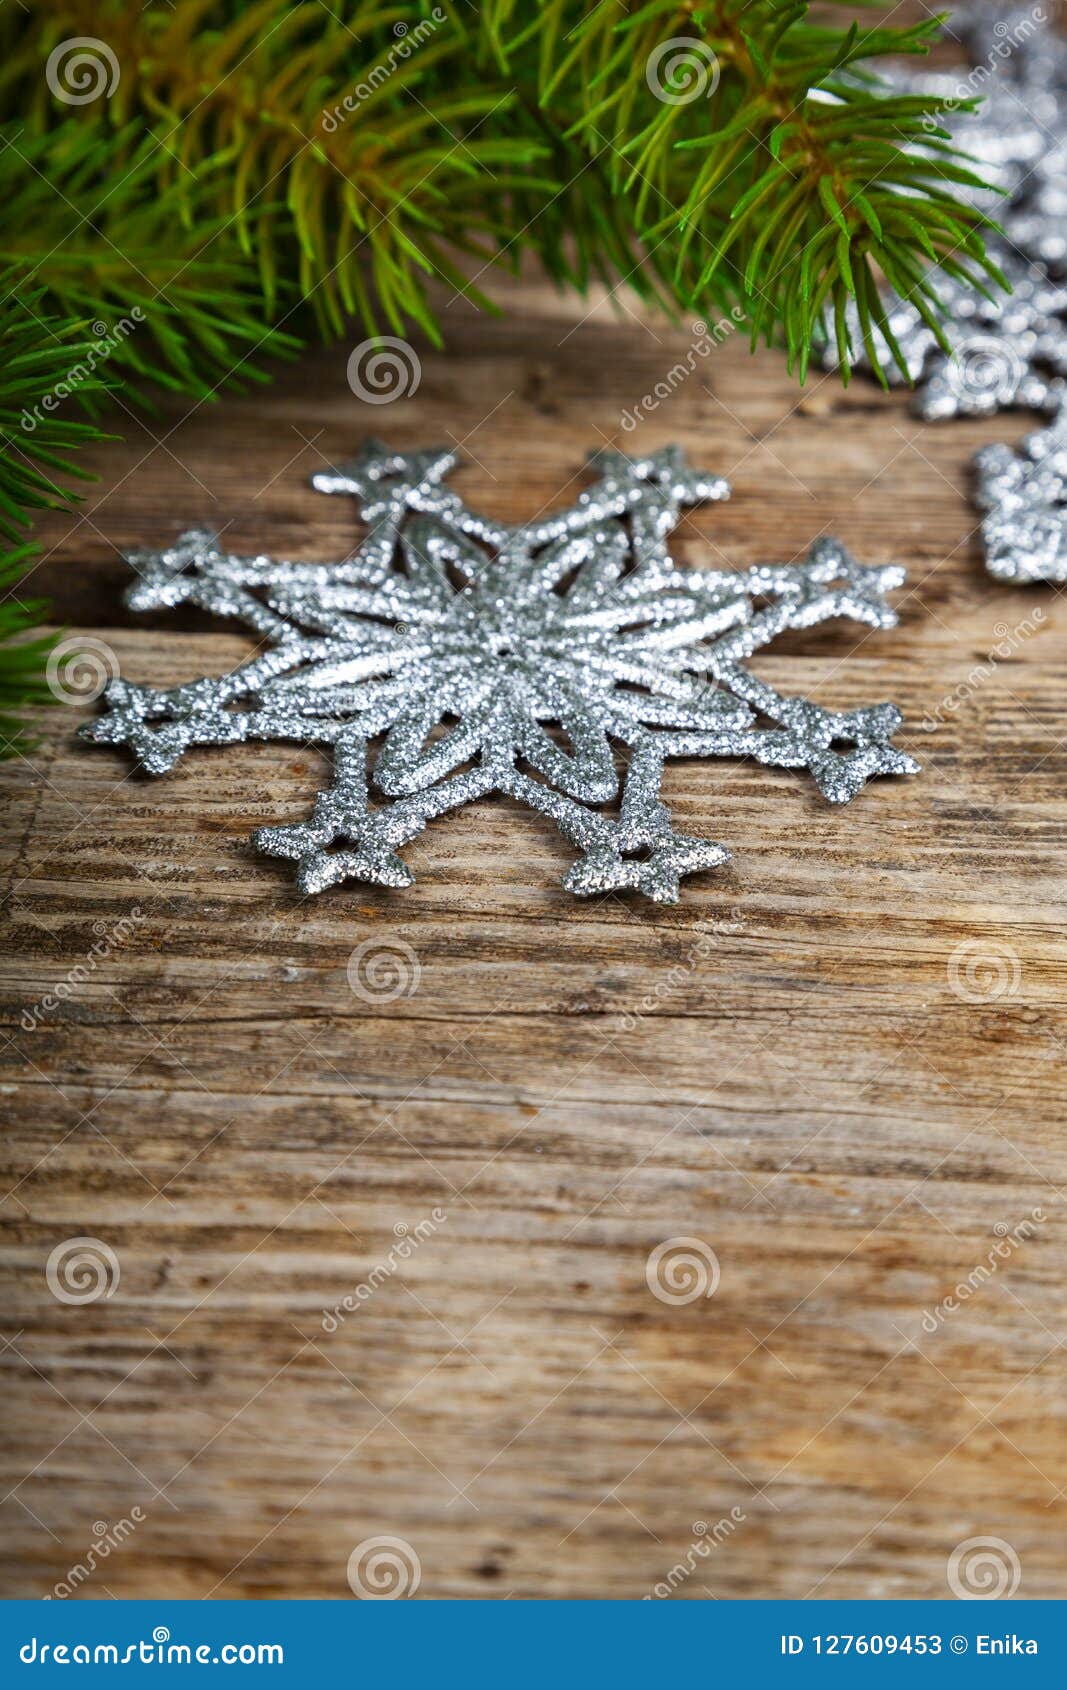 Silvery Snowflakes and Fir Branches Stock Image - Image of design ...